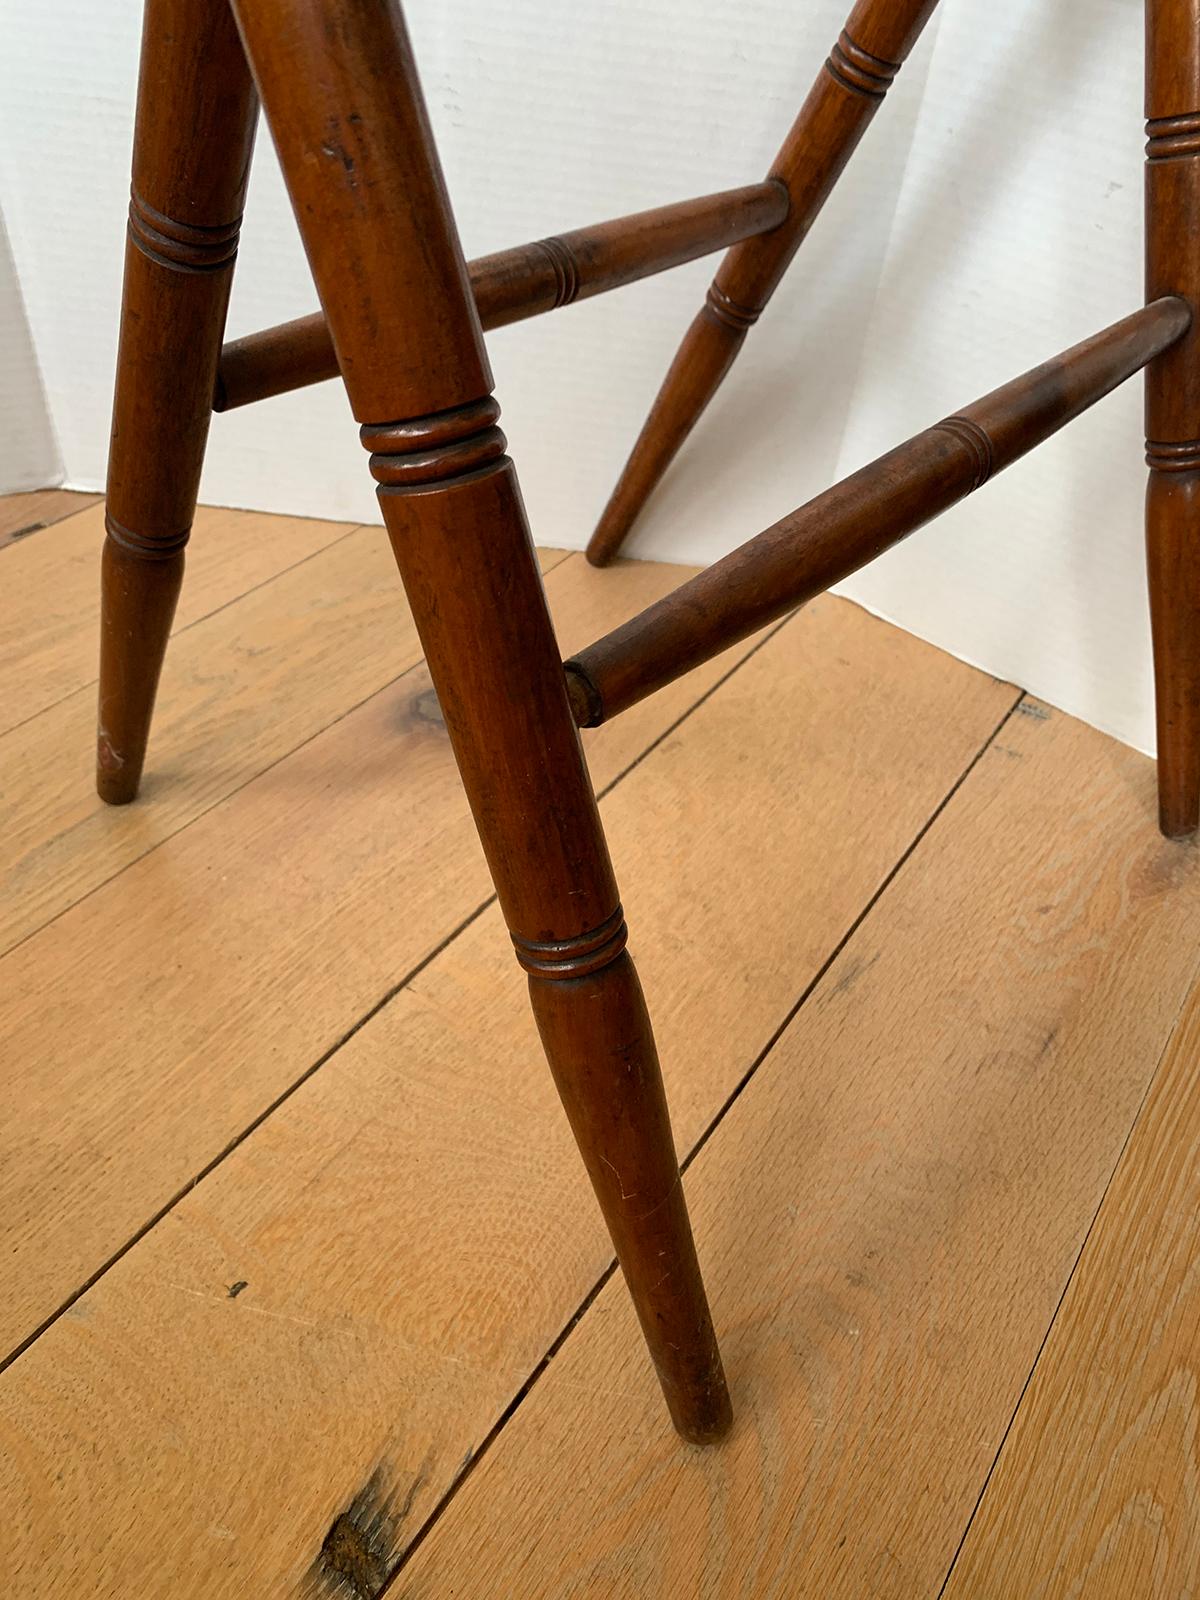 19th-20th Century Wooden Folding Tray Stand For Sale 10